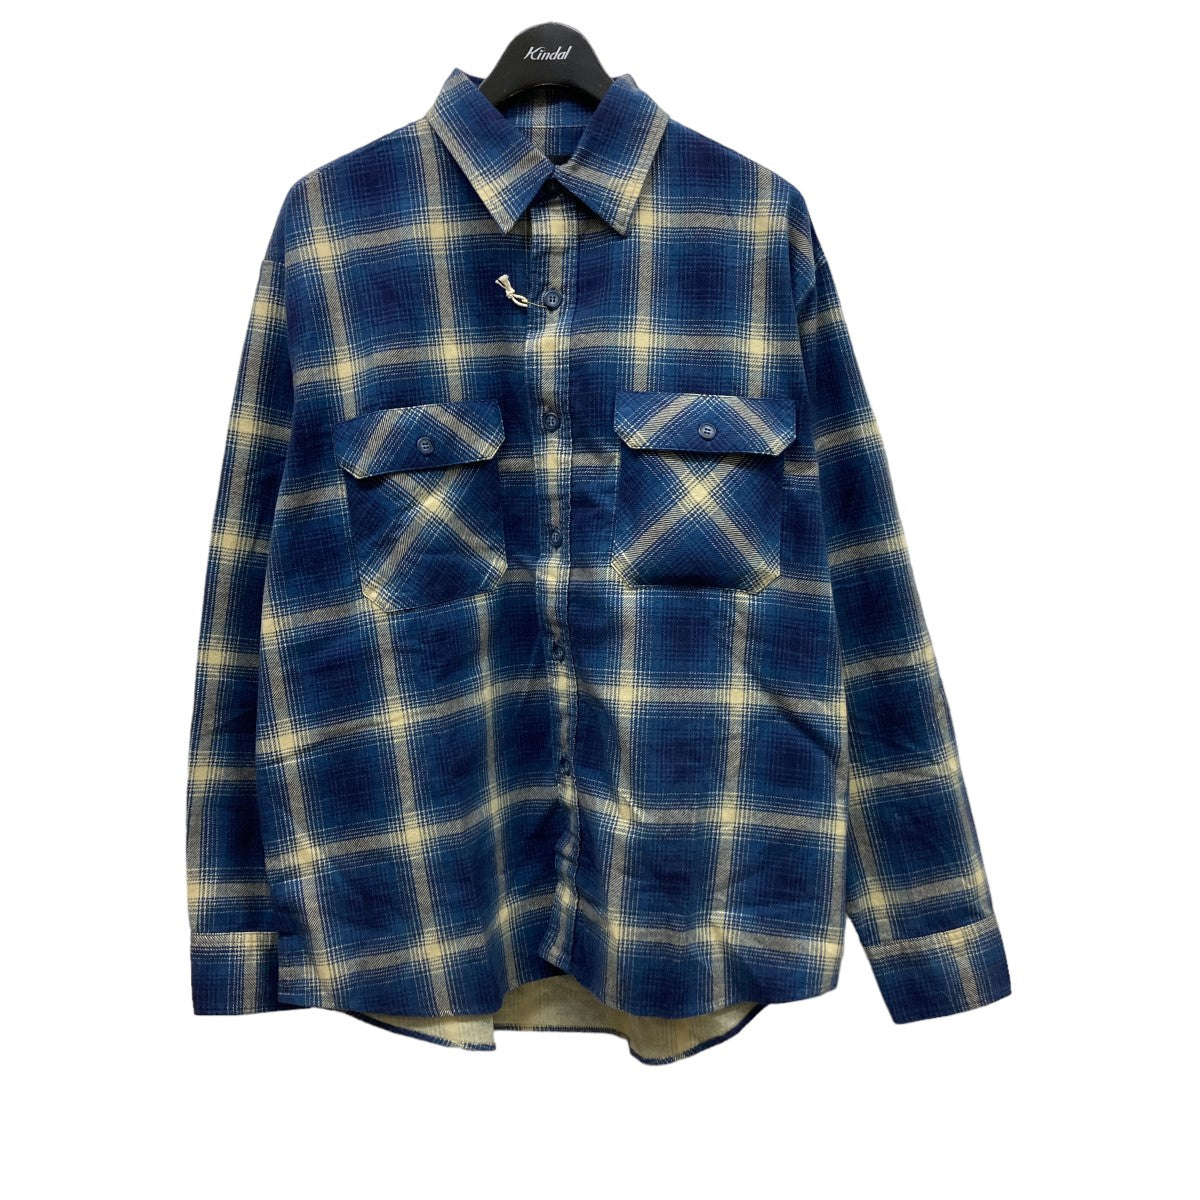 「OMBRE CHECK SHIRT」 チェックネルシャツ 23AW03BL3 3